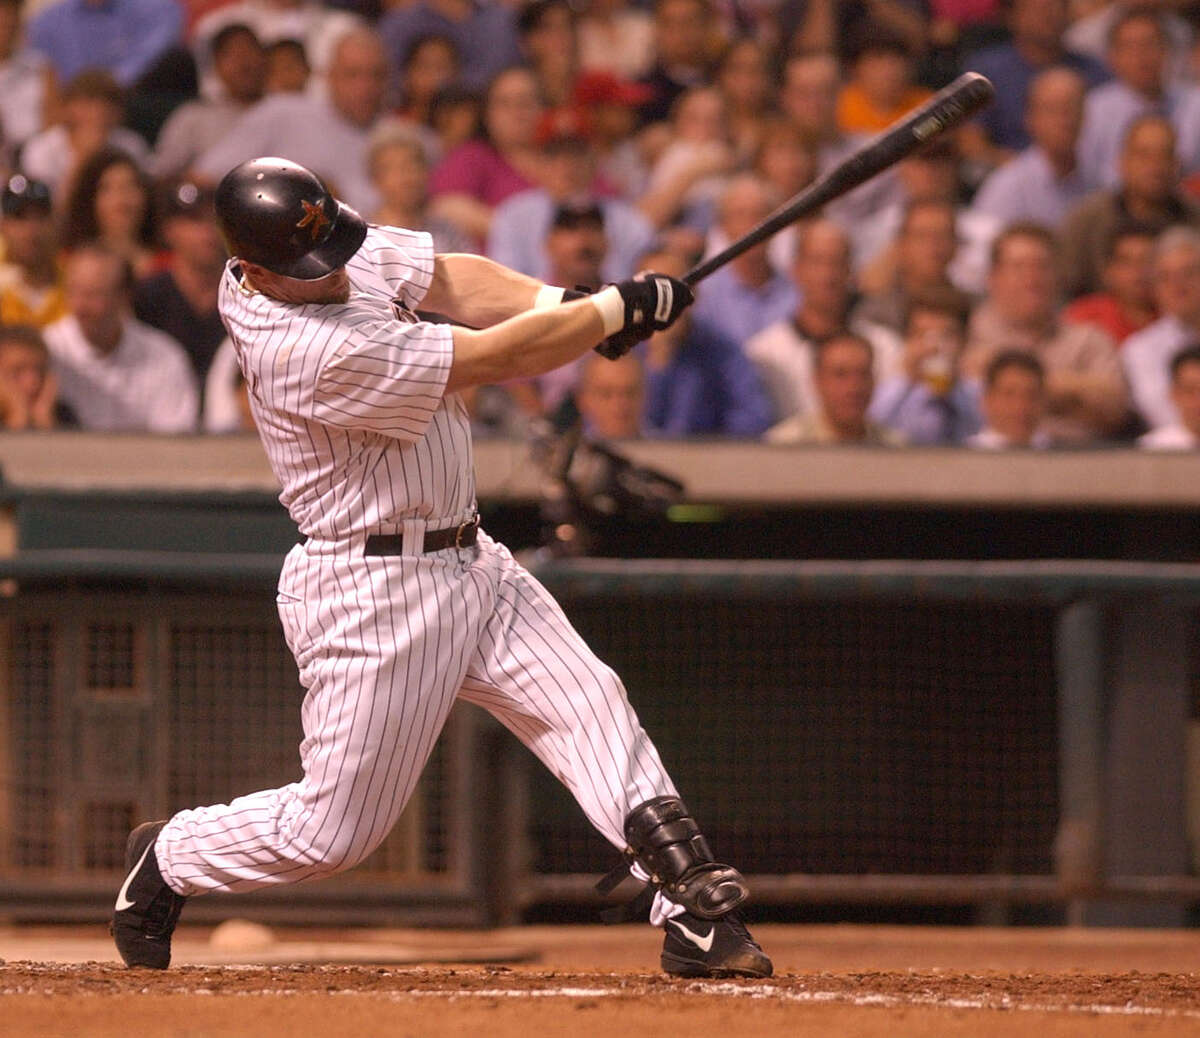 Jeff Bagwell powers the ball into left field on a triple in the 4th inning, during the Houston Astros-Florida Marlins game at Minute Maid Park in 2002.